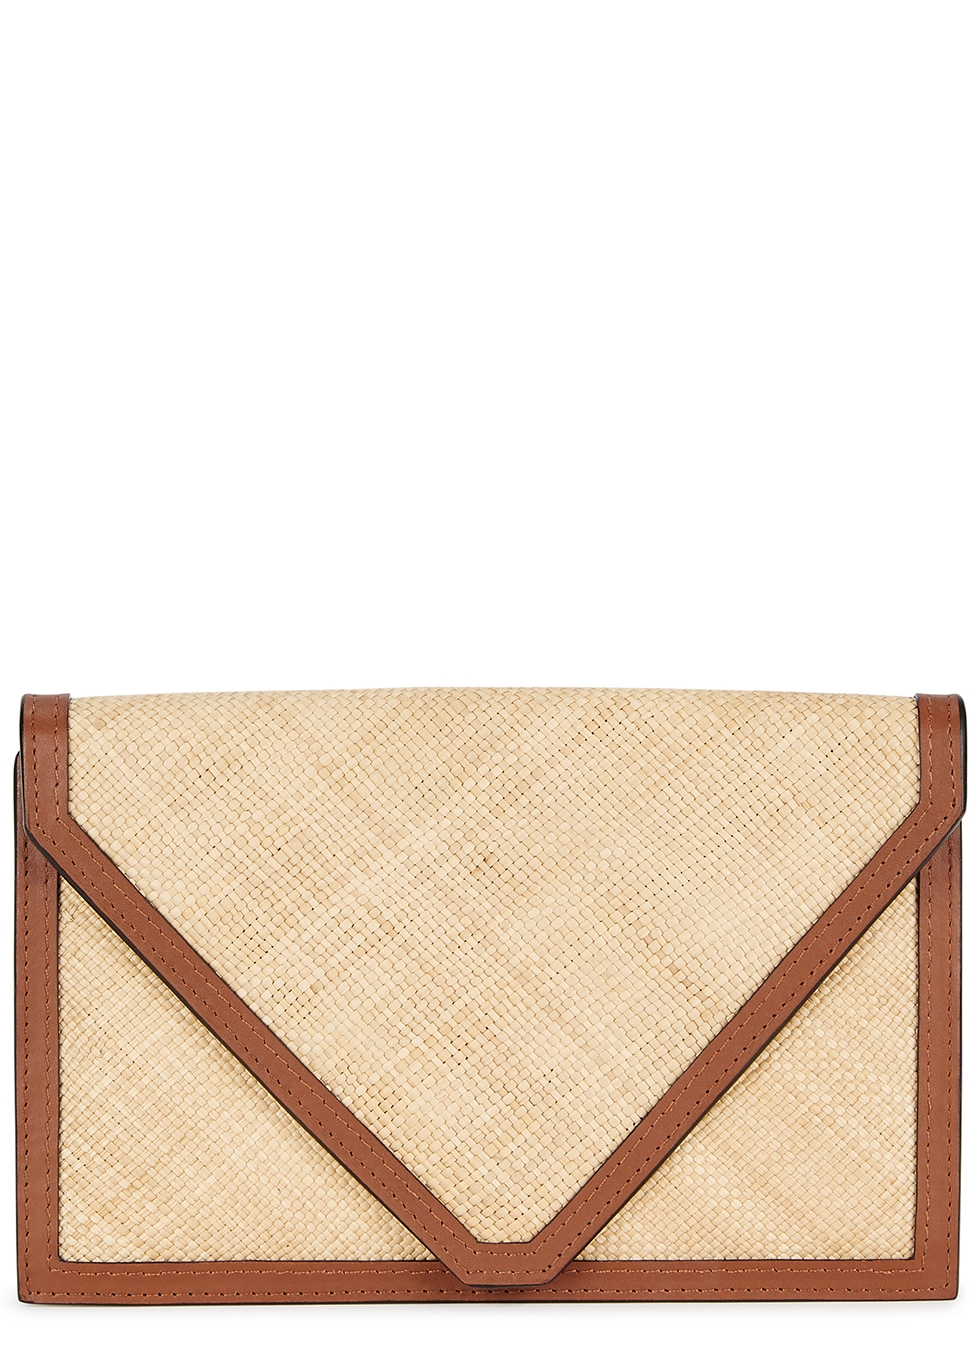 The Envelope leather and raffia clutch